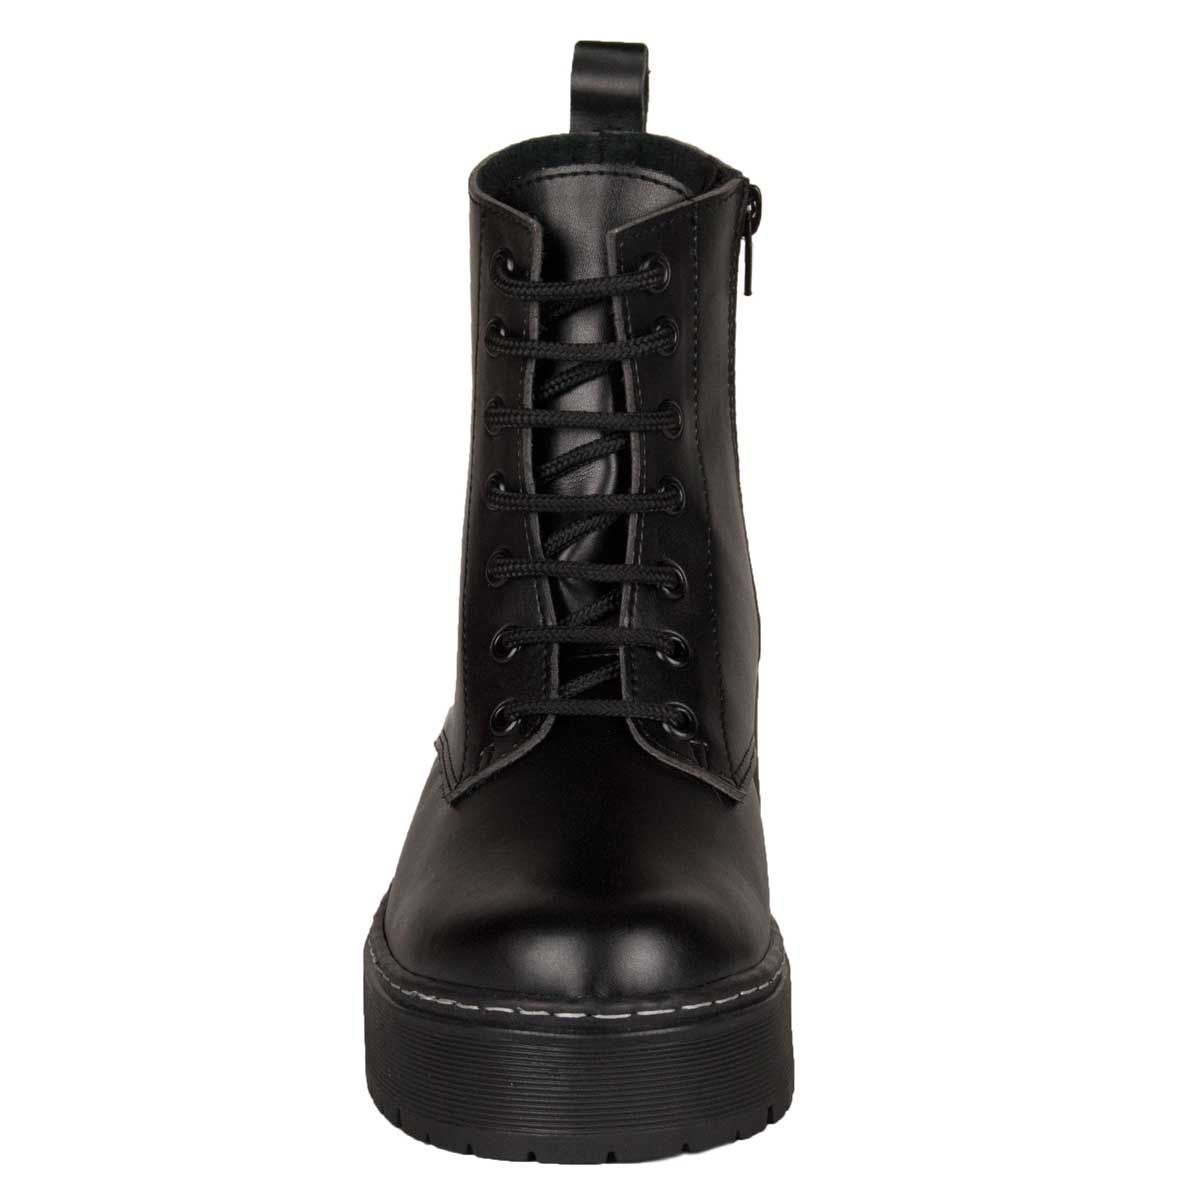 Modern and comfortable military-style boot for lady with platform and material, very easy to clean. It carries laces of thick thread and metallic eyelets in black, as well as a side zipper, to facilitate footwear. It brings anterior and posterior buttress, it also comes doubly sewn, providing greater quality and consistency to the boot. Interior lined with textile, with padded plant. Stitched floor. Anti-slip rubber sole with tacos. Made in Spain.